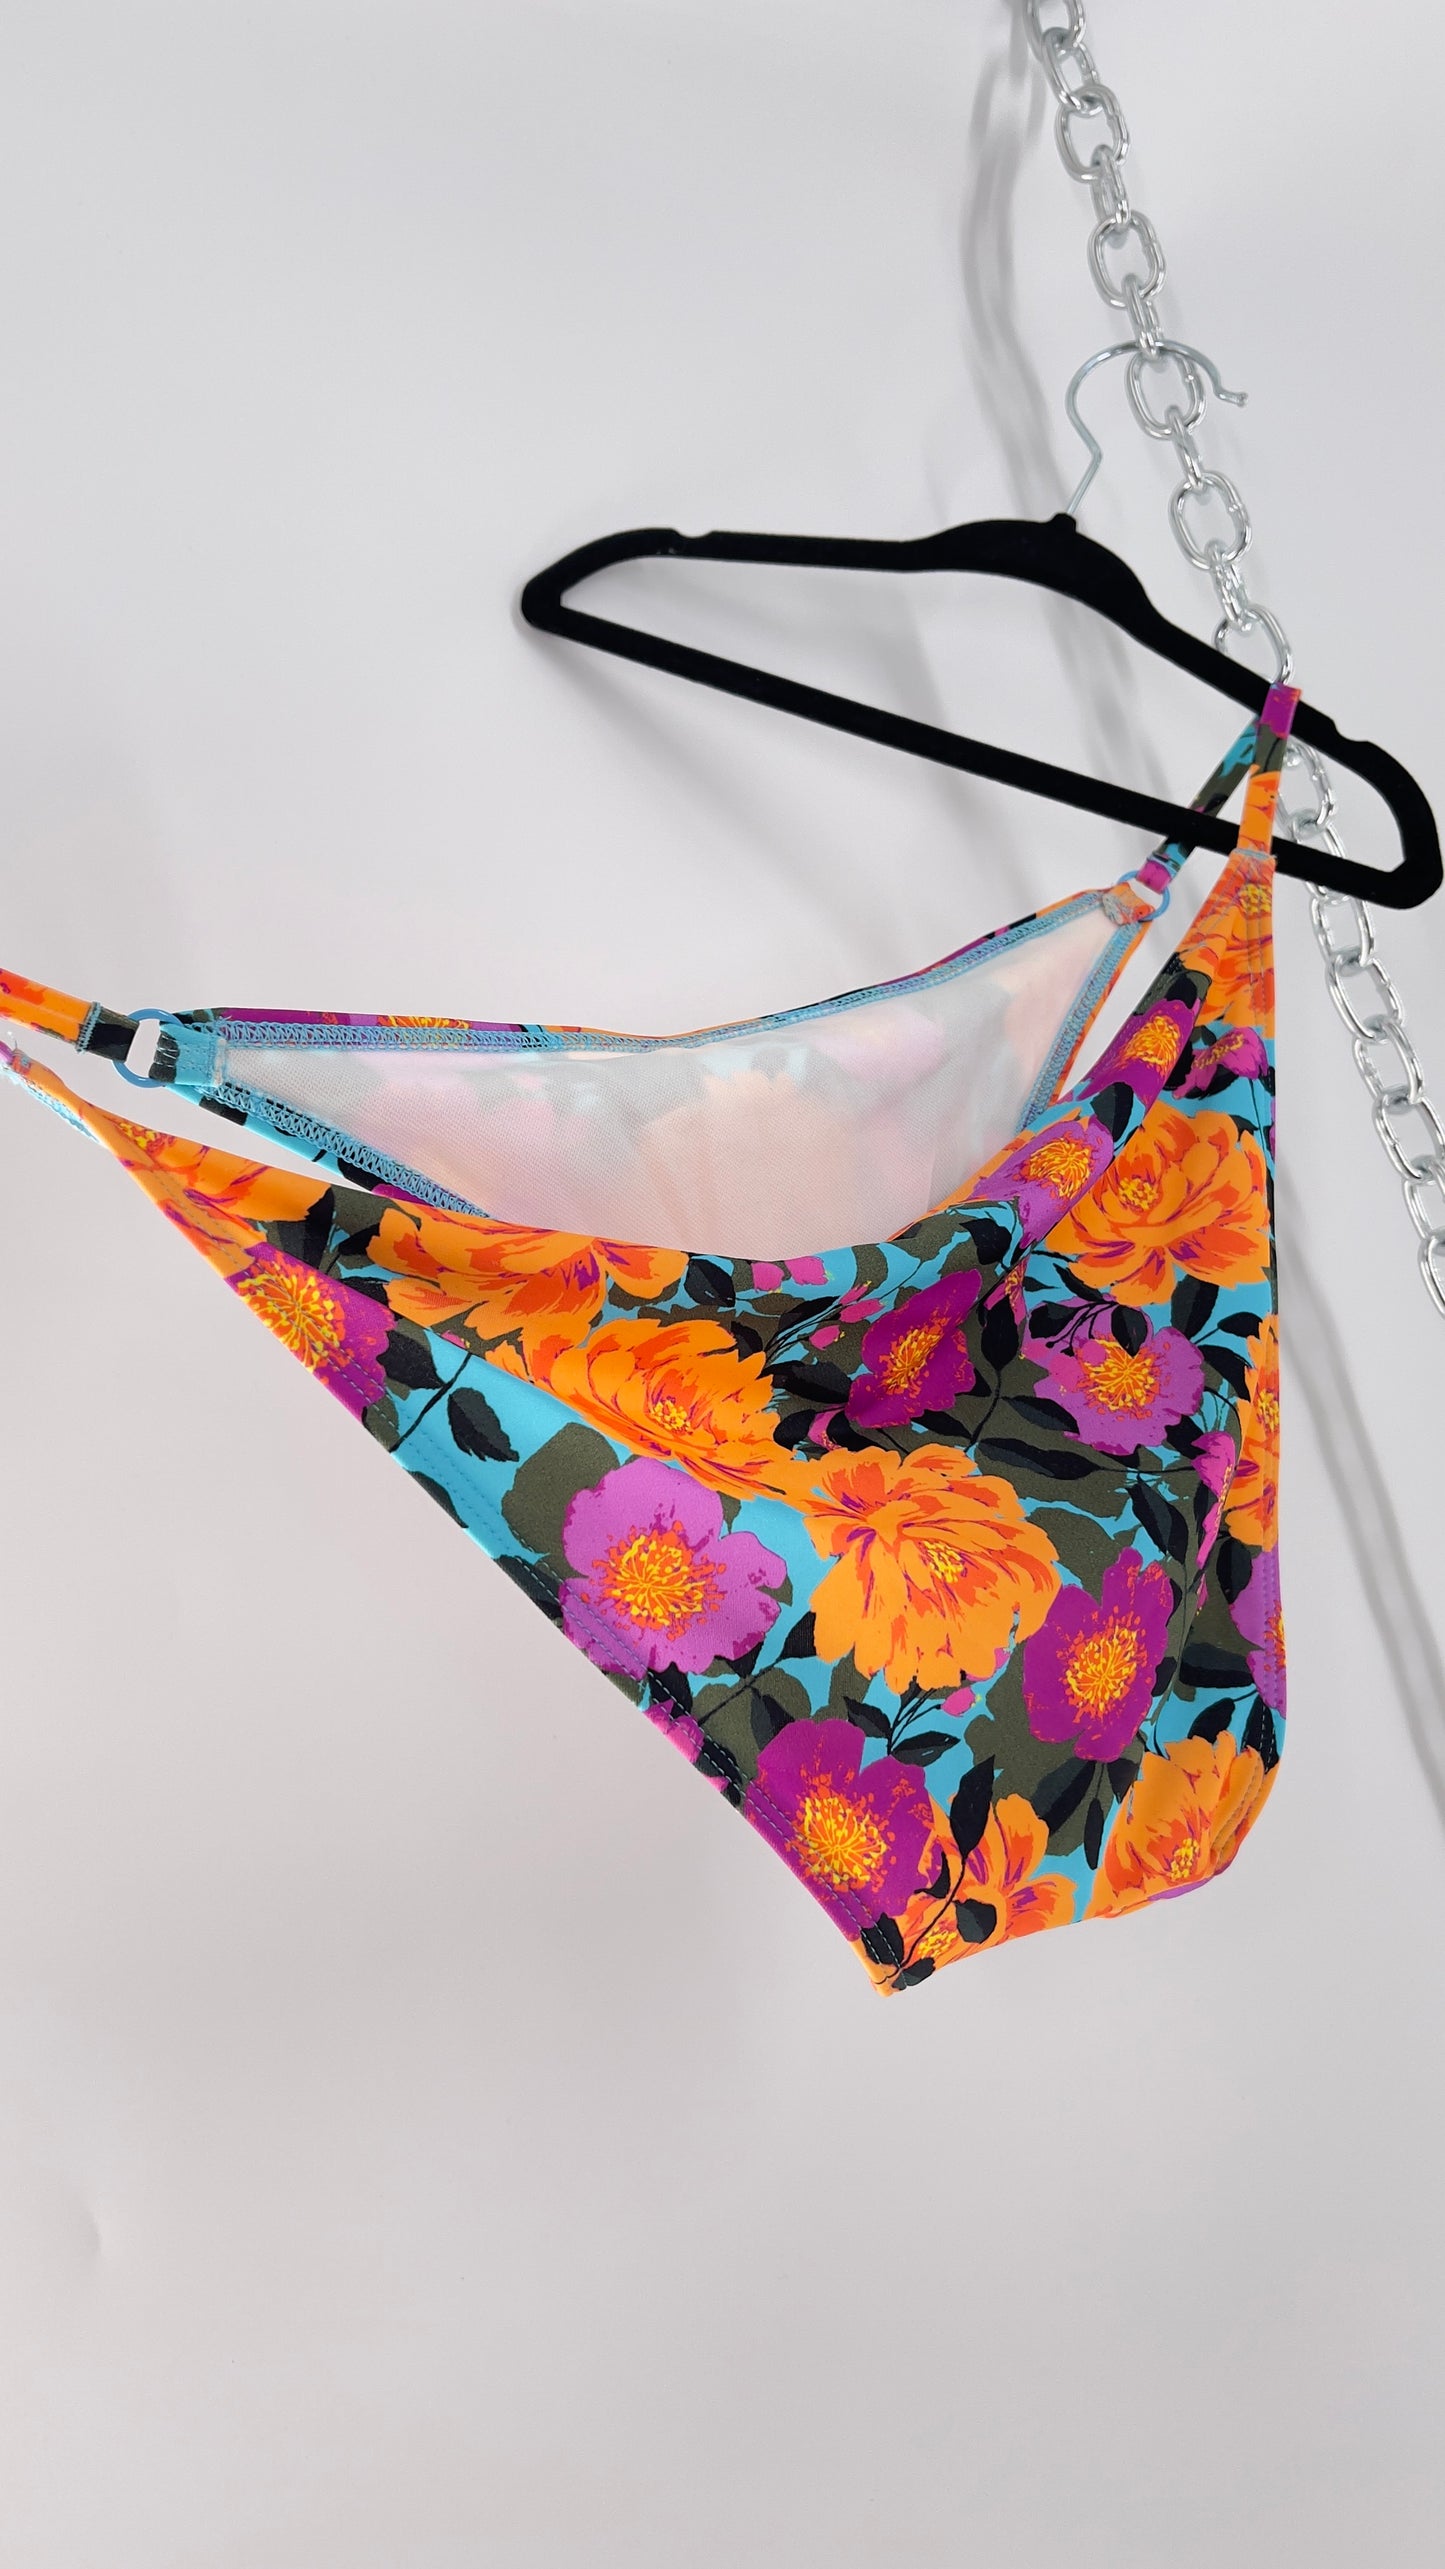 Urban Outfitters Out from Under Blue Floral Bikini/Swim Bottoms (XL)